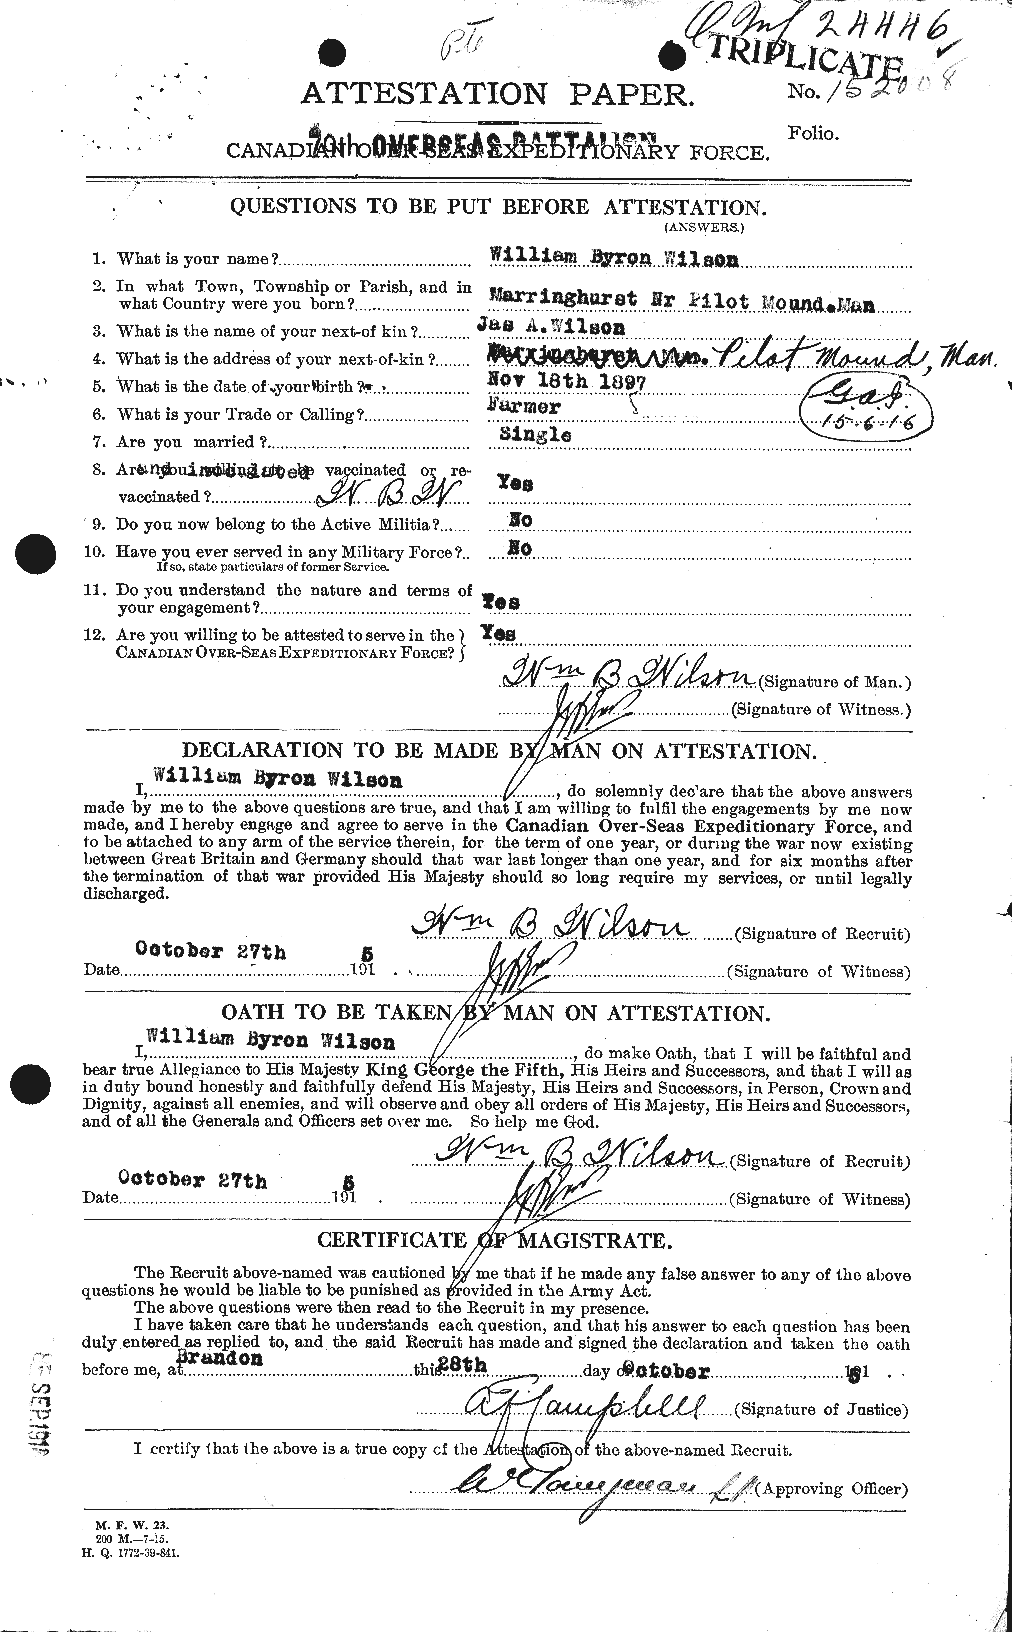 Personnel Records of the First World War - CEF 681946a